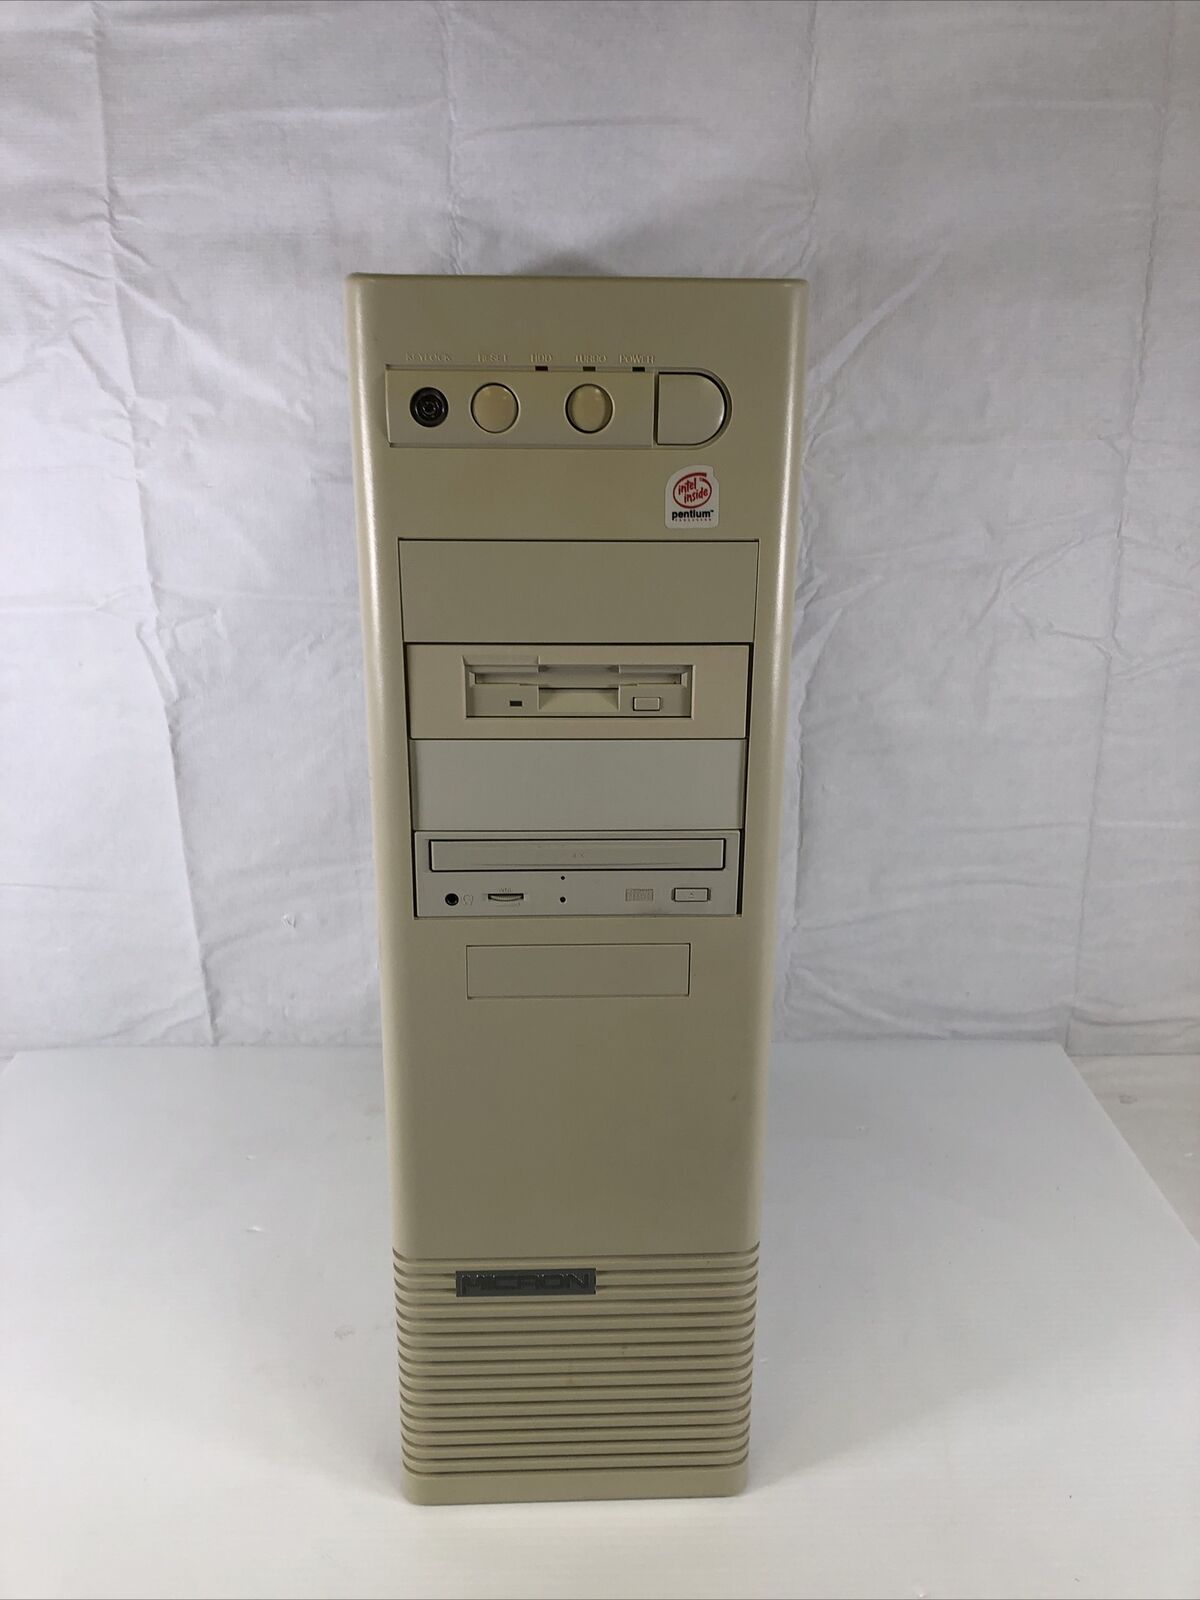 Vintage Micron PC Computer ATX Pentium 200MHz 64MB RAM NO HDD Tested